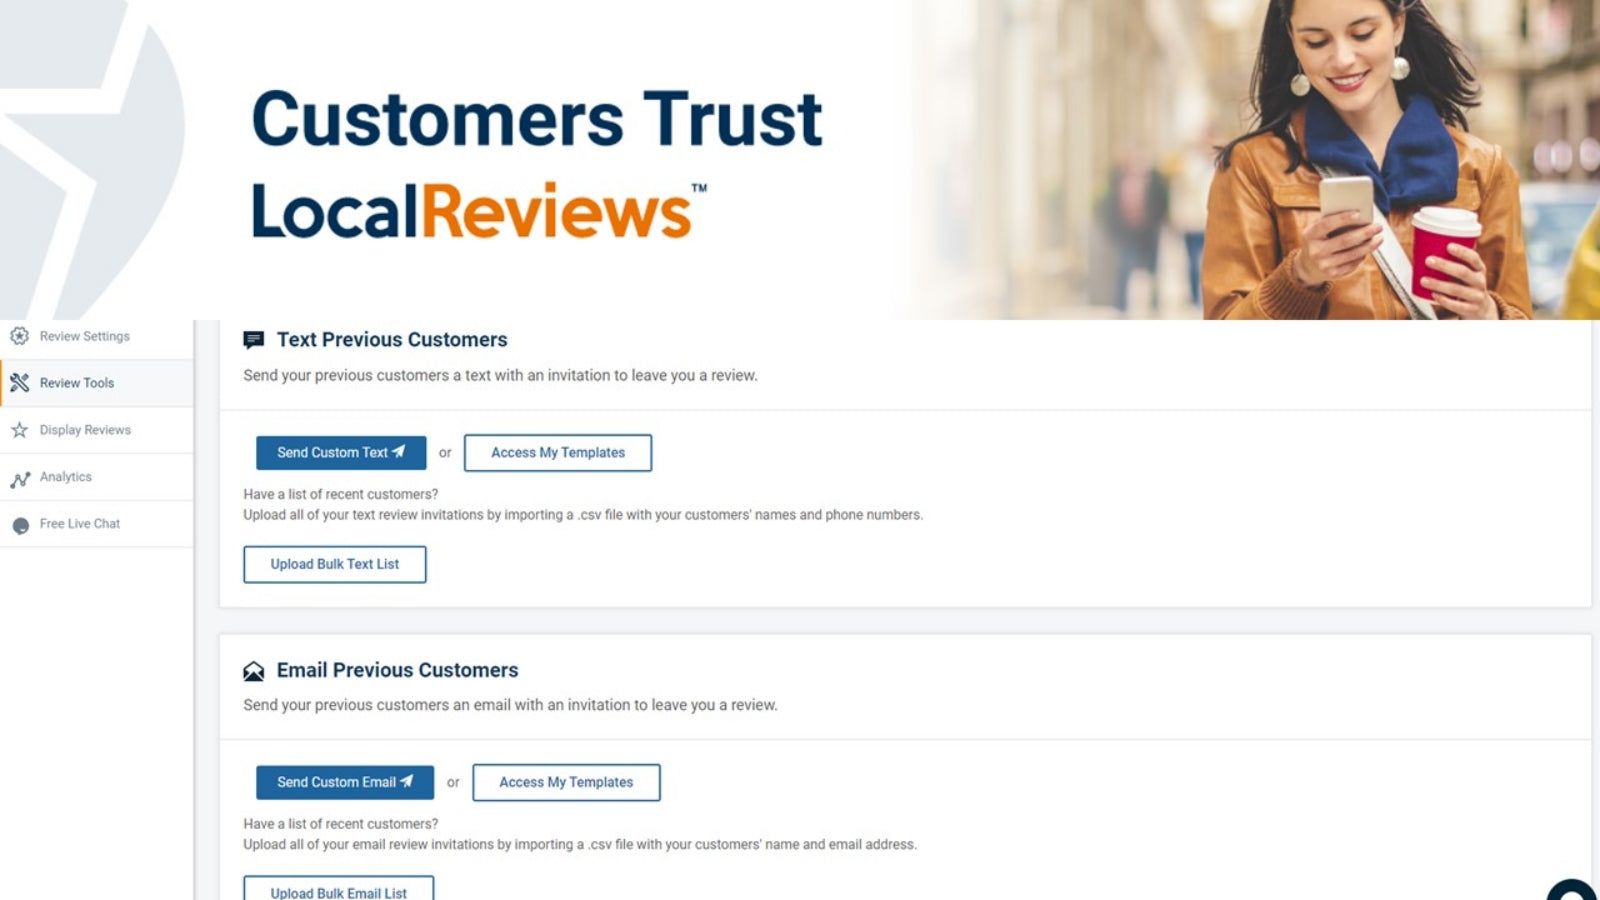 Customers Trust Local Reviews